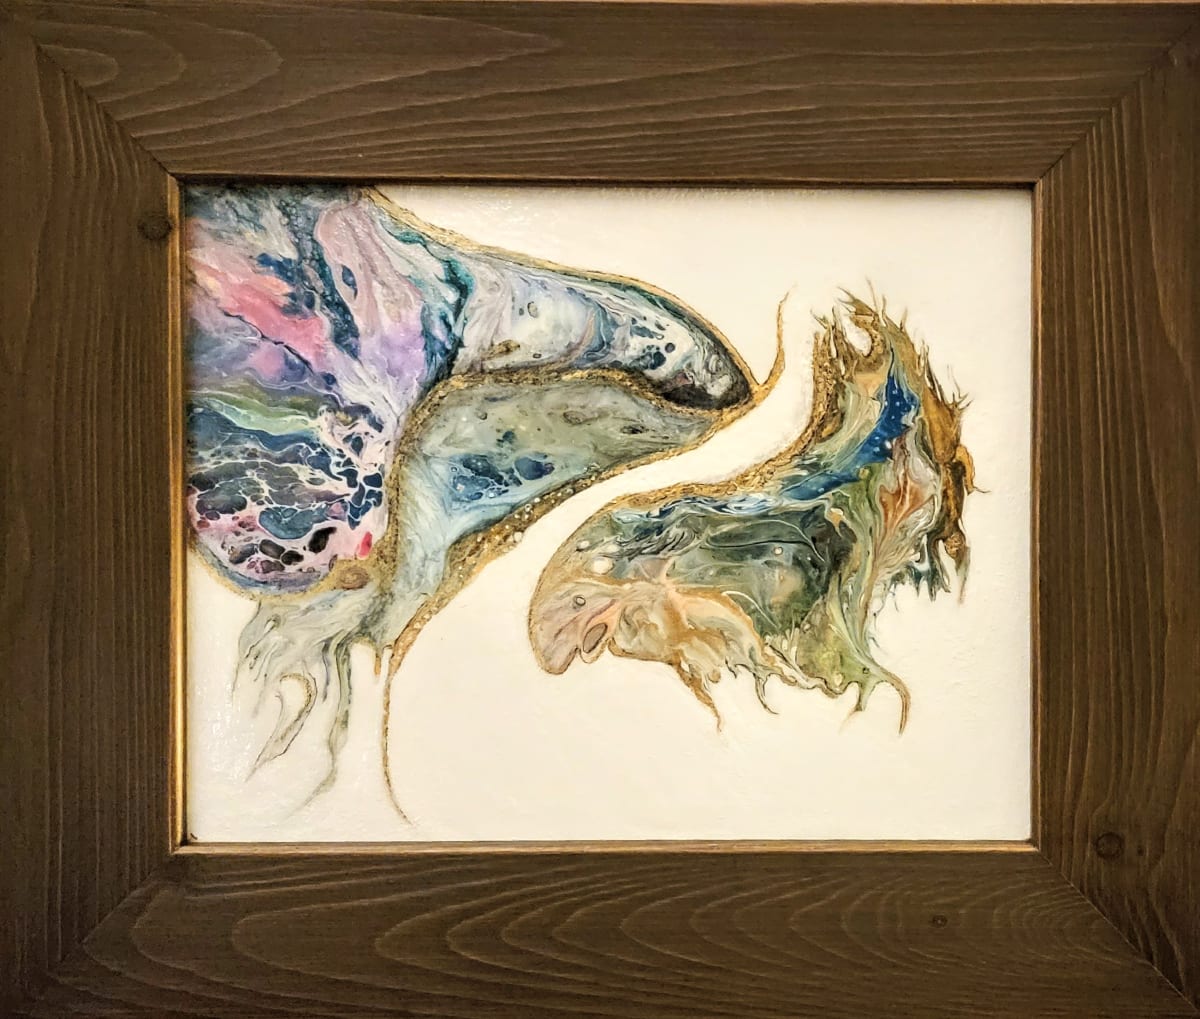 The Laws of Attraction by Studio Relics by Linda joy Weinstein  Image: The Laws of AttractionAcrylic alcohol ink and mica on canvas